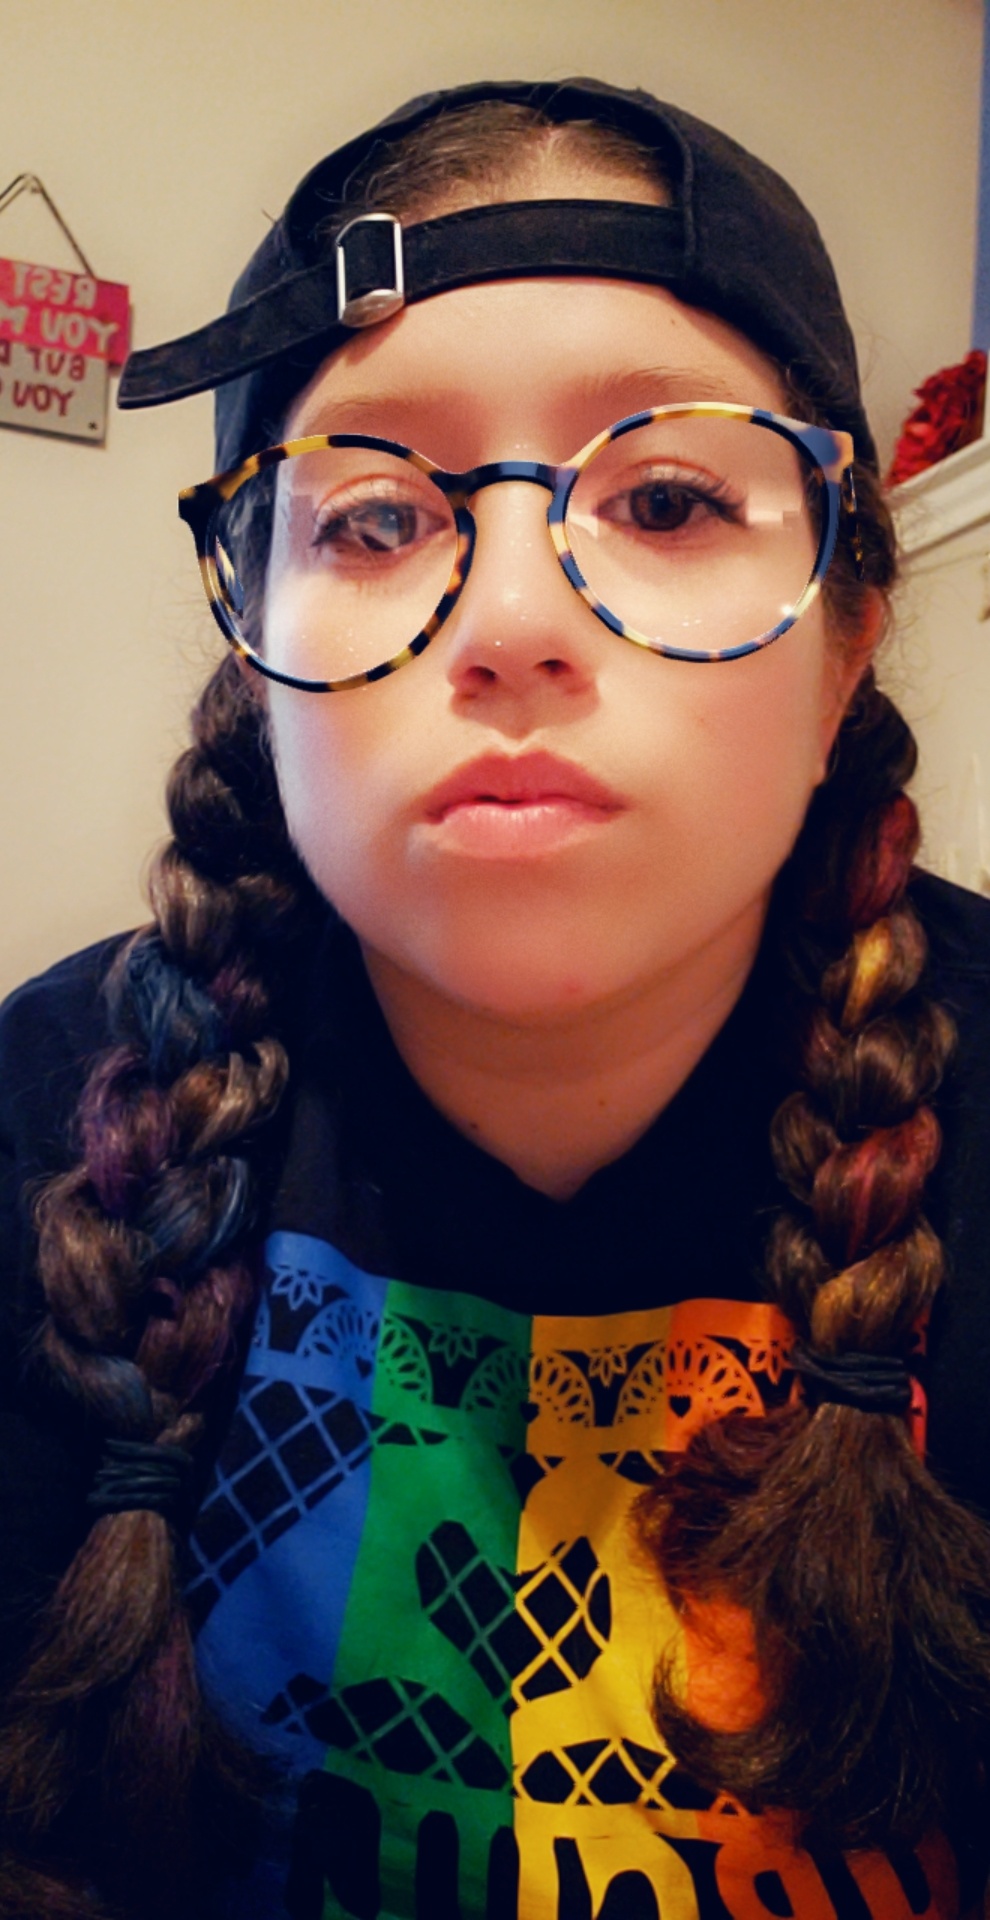 A photo of Sueitko with with snapchat filter glasses, braided hair, backwards hat, and rainbow sweater.